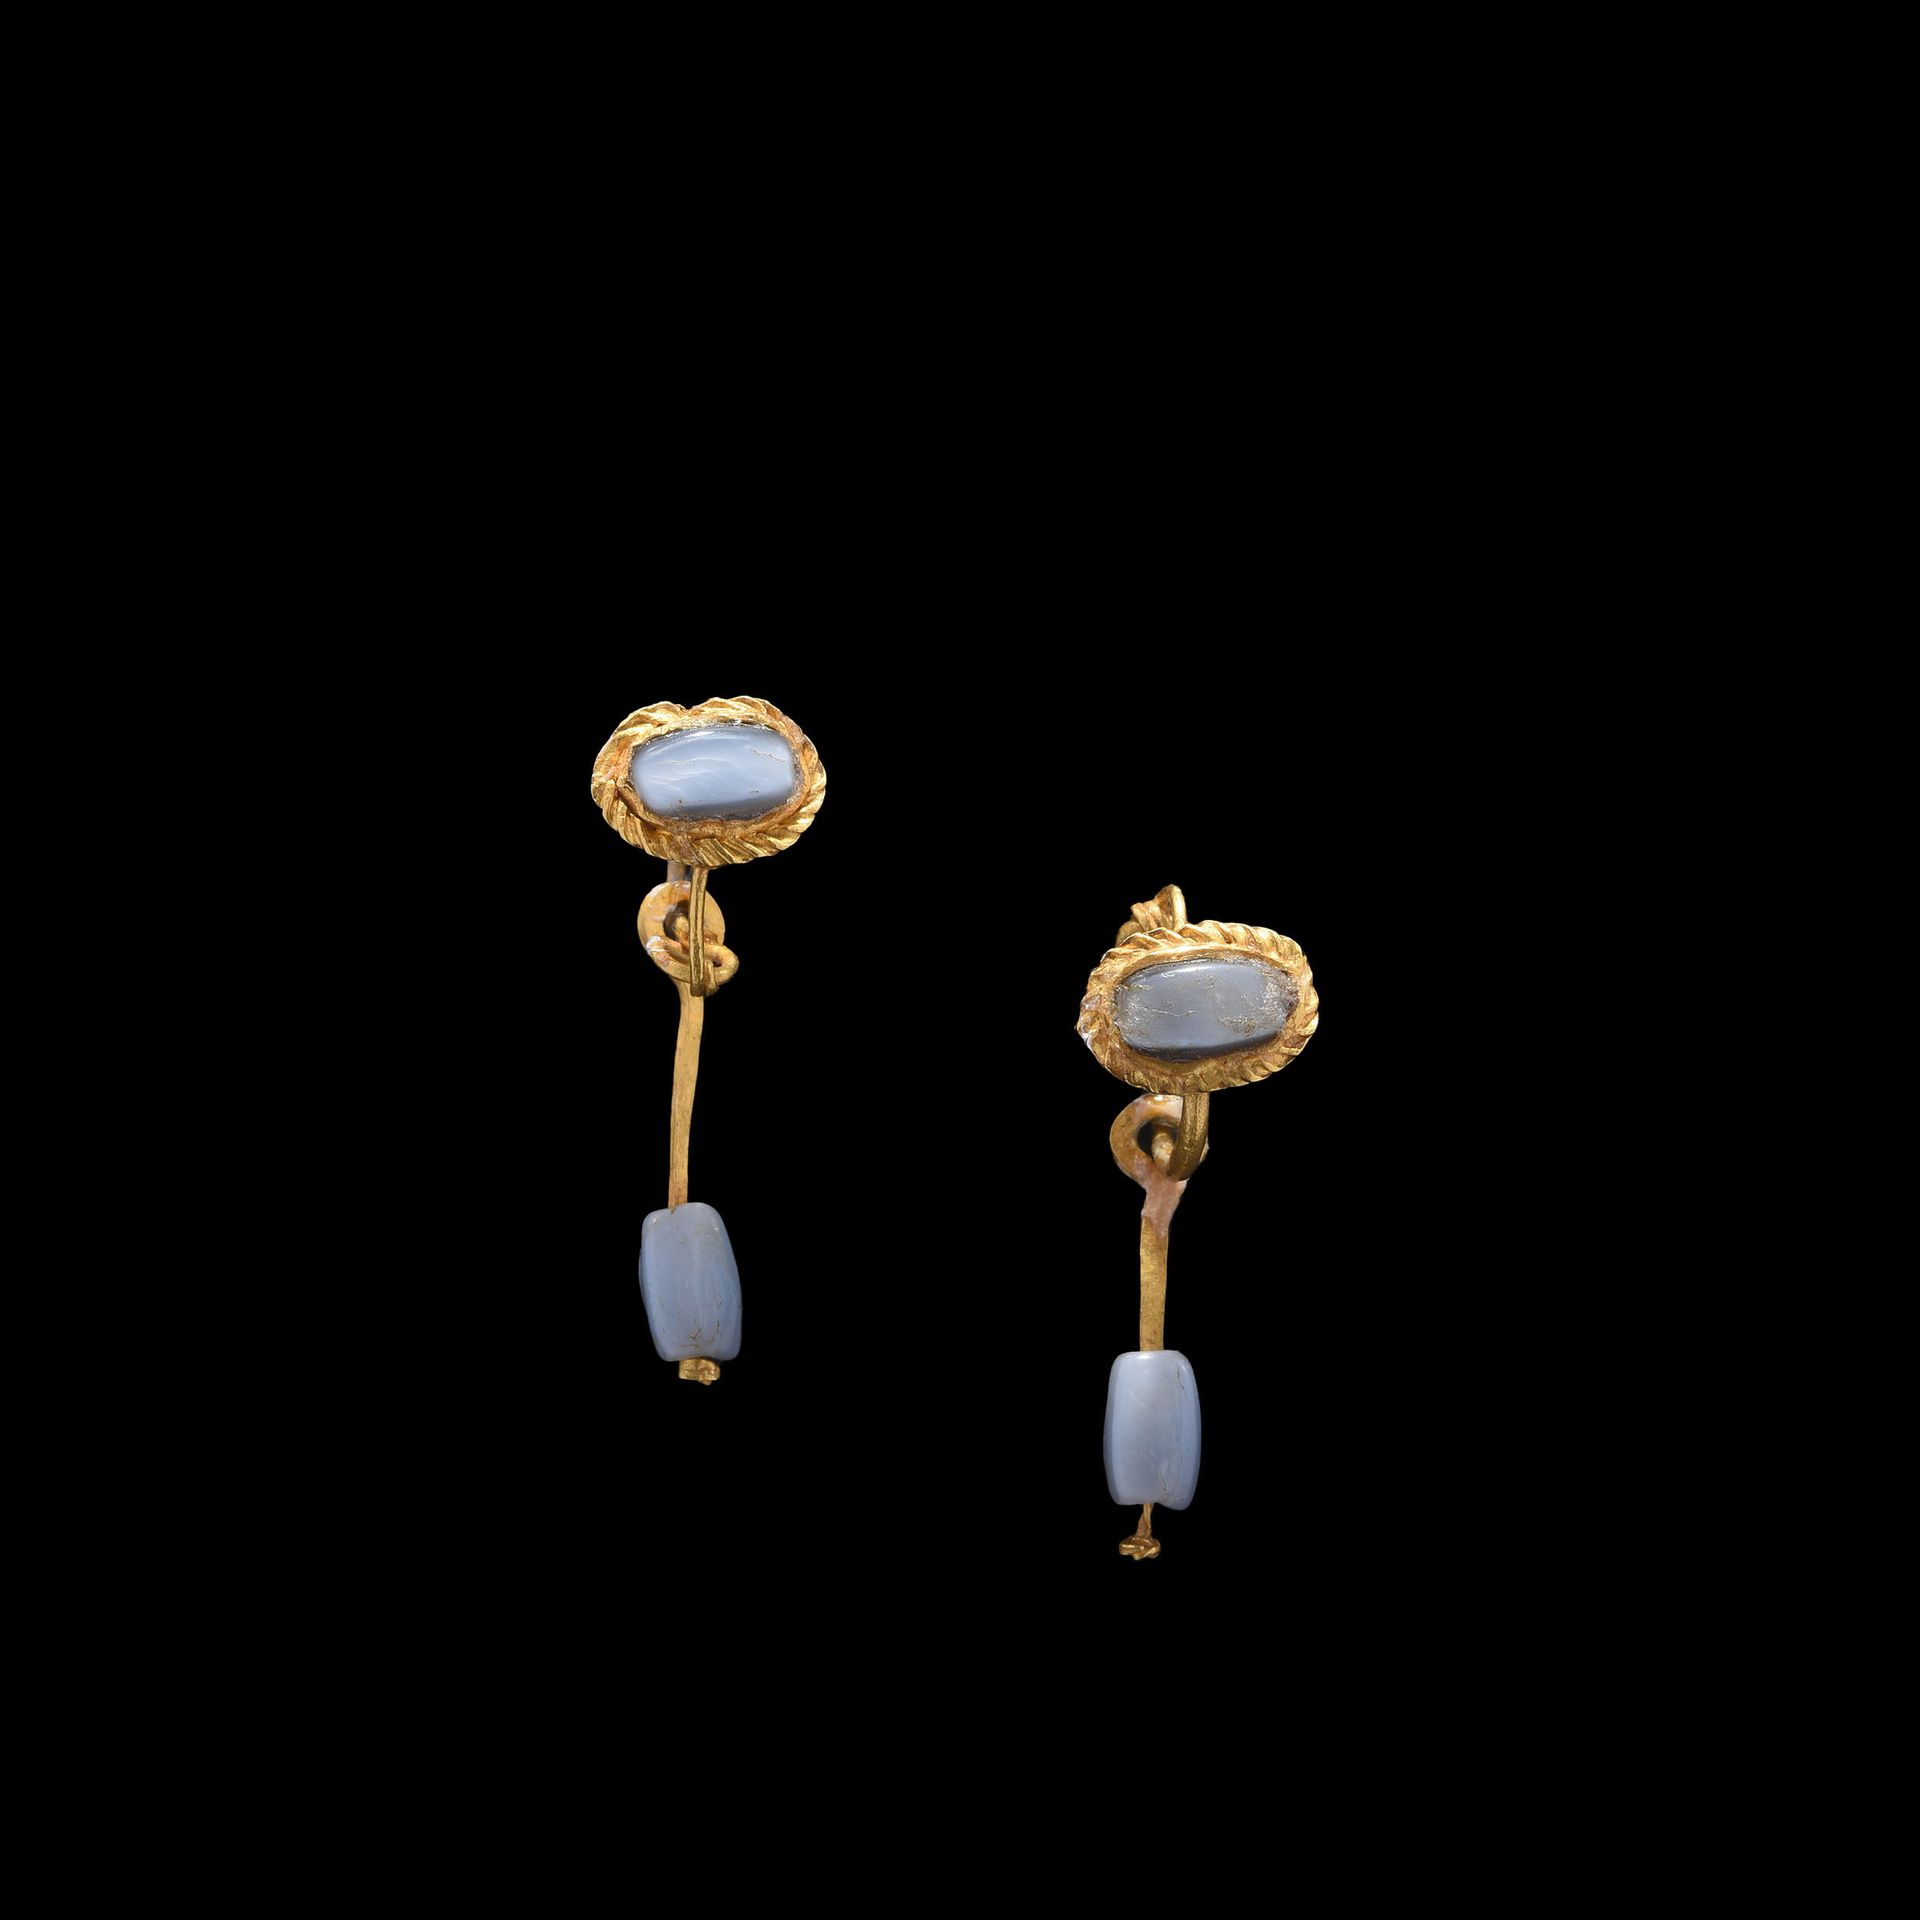 Null PAIR OF EARRINGS

Roman art, 1st-2nd century.

Gold, set with bluish chalce&hellip;